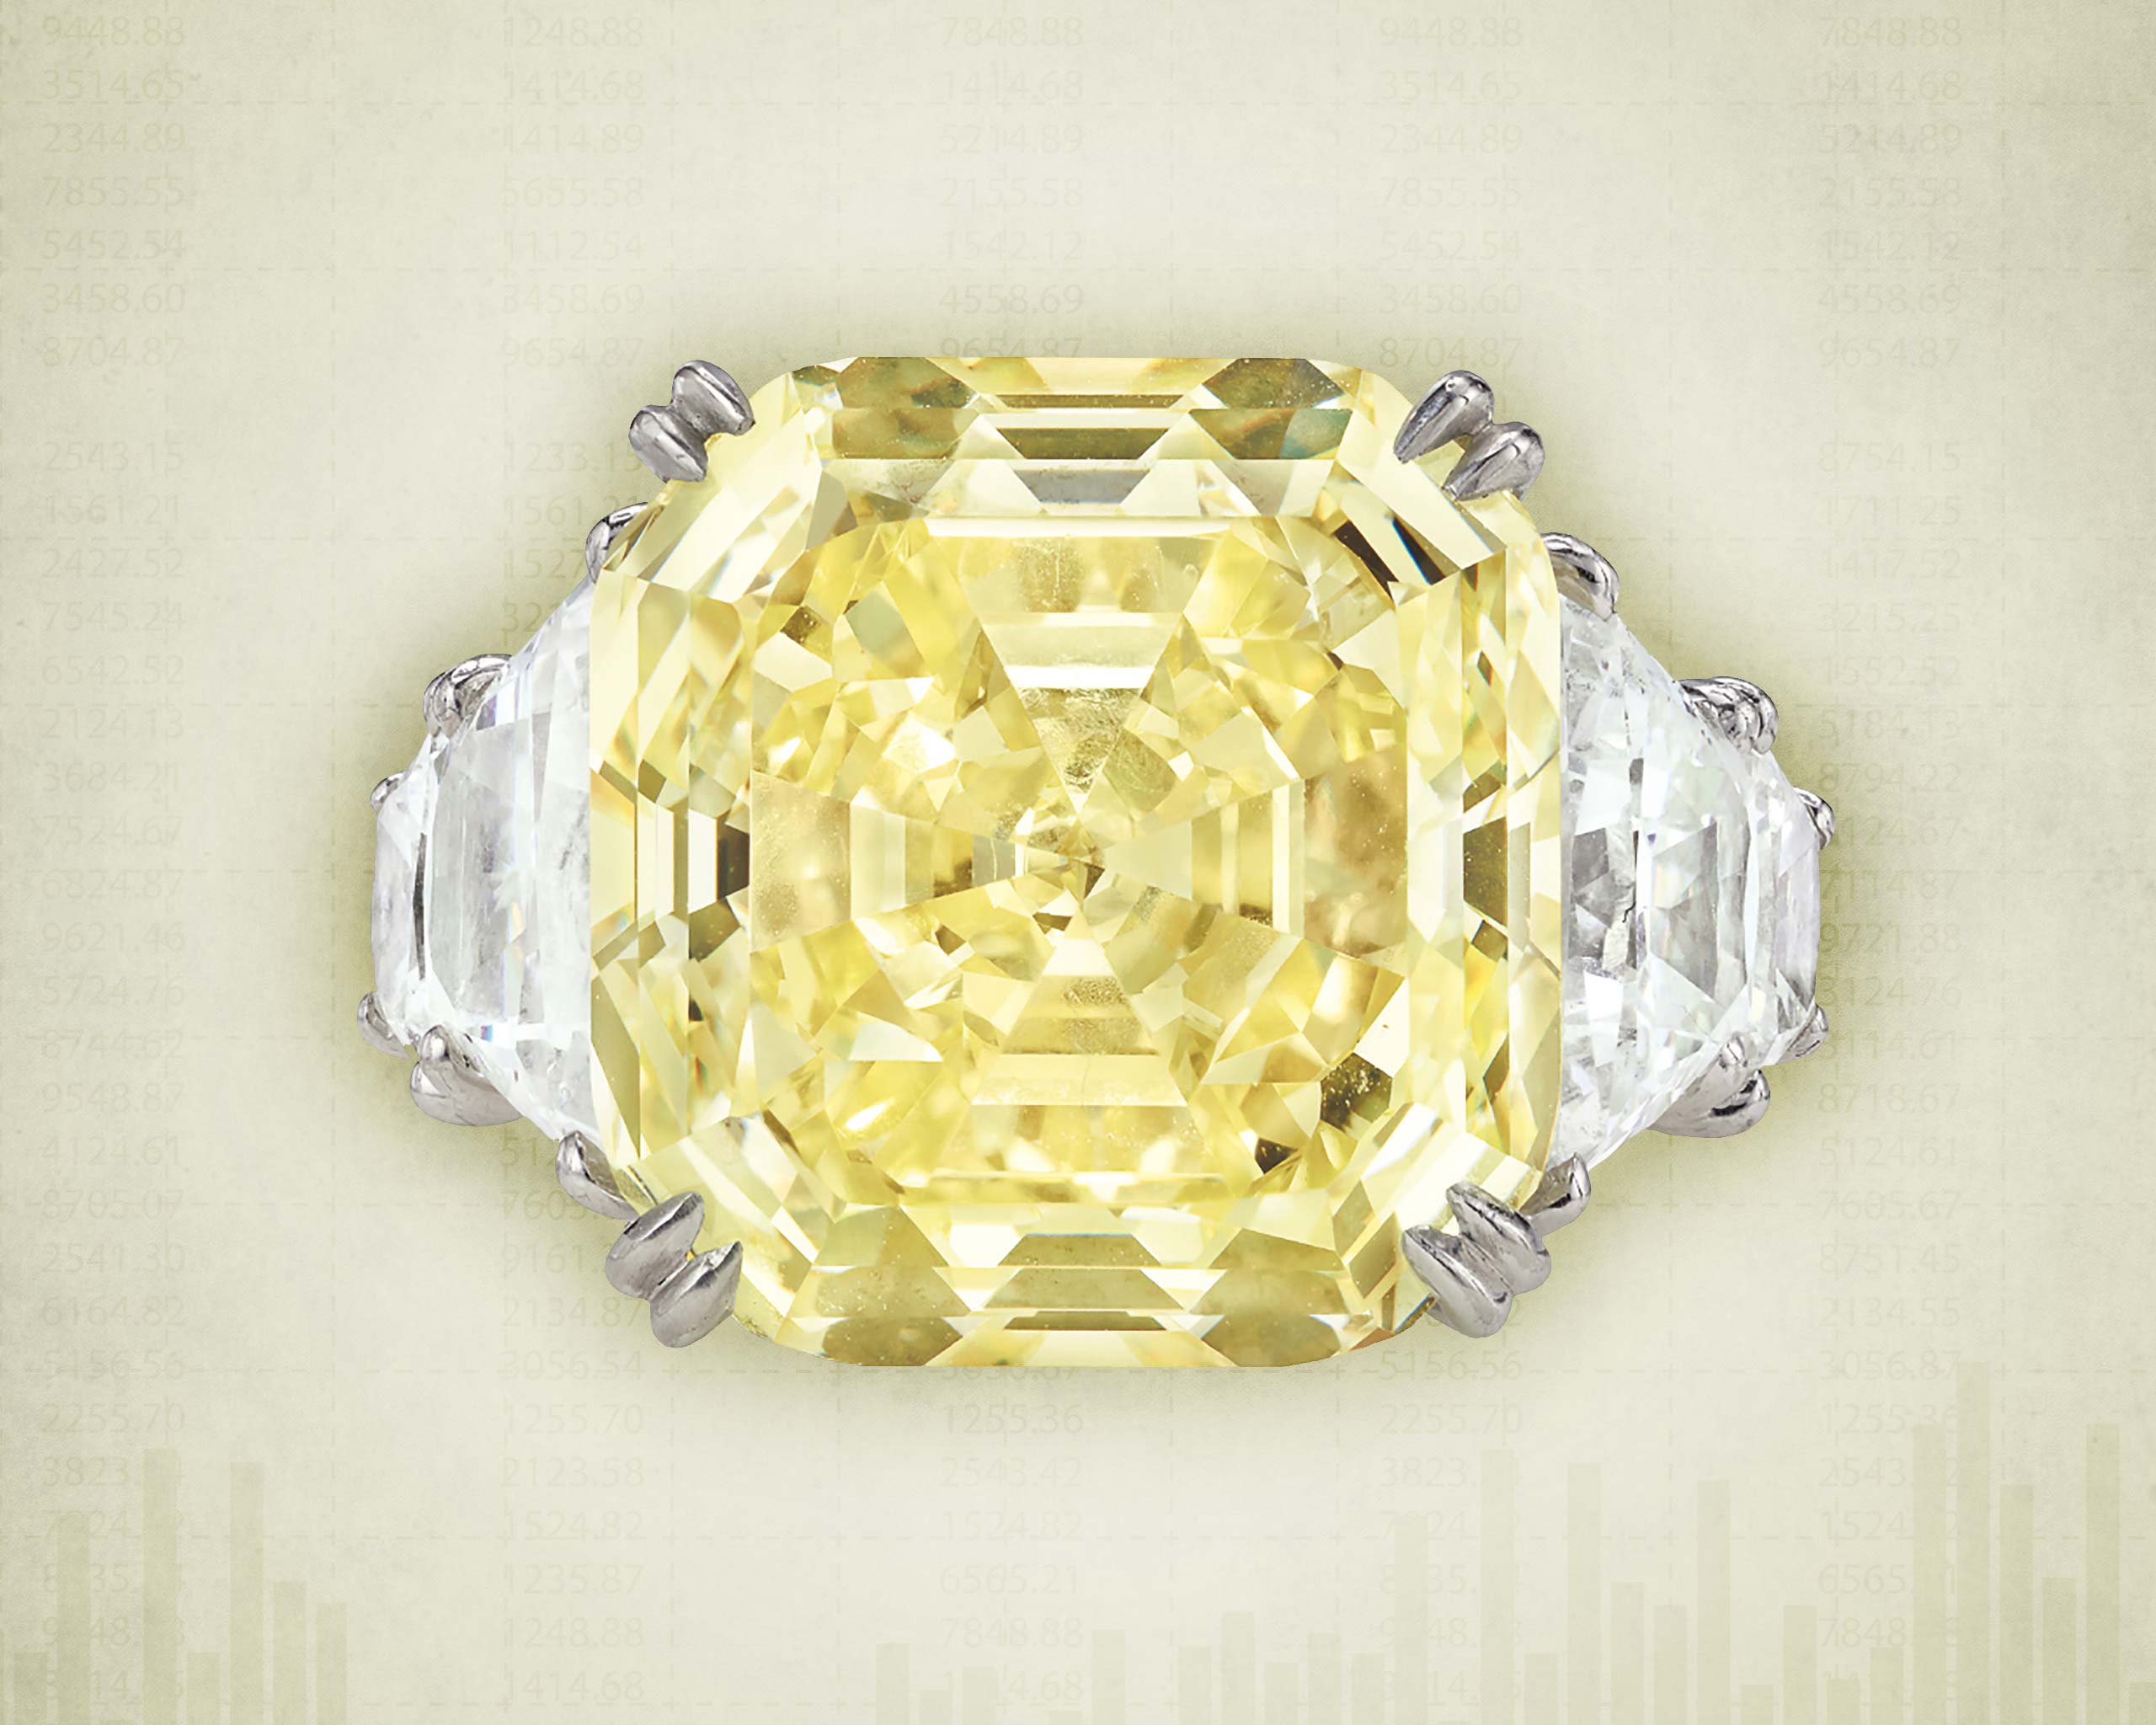 De Beers 16.2-carat fancy intense yellow diamond ring with 2 trapezoid diamonds sold at the 2020 Phillips auction